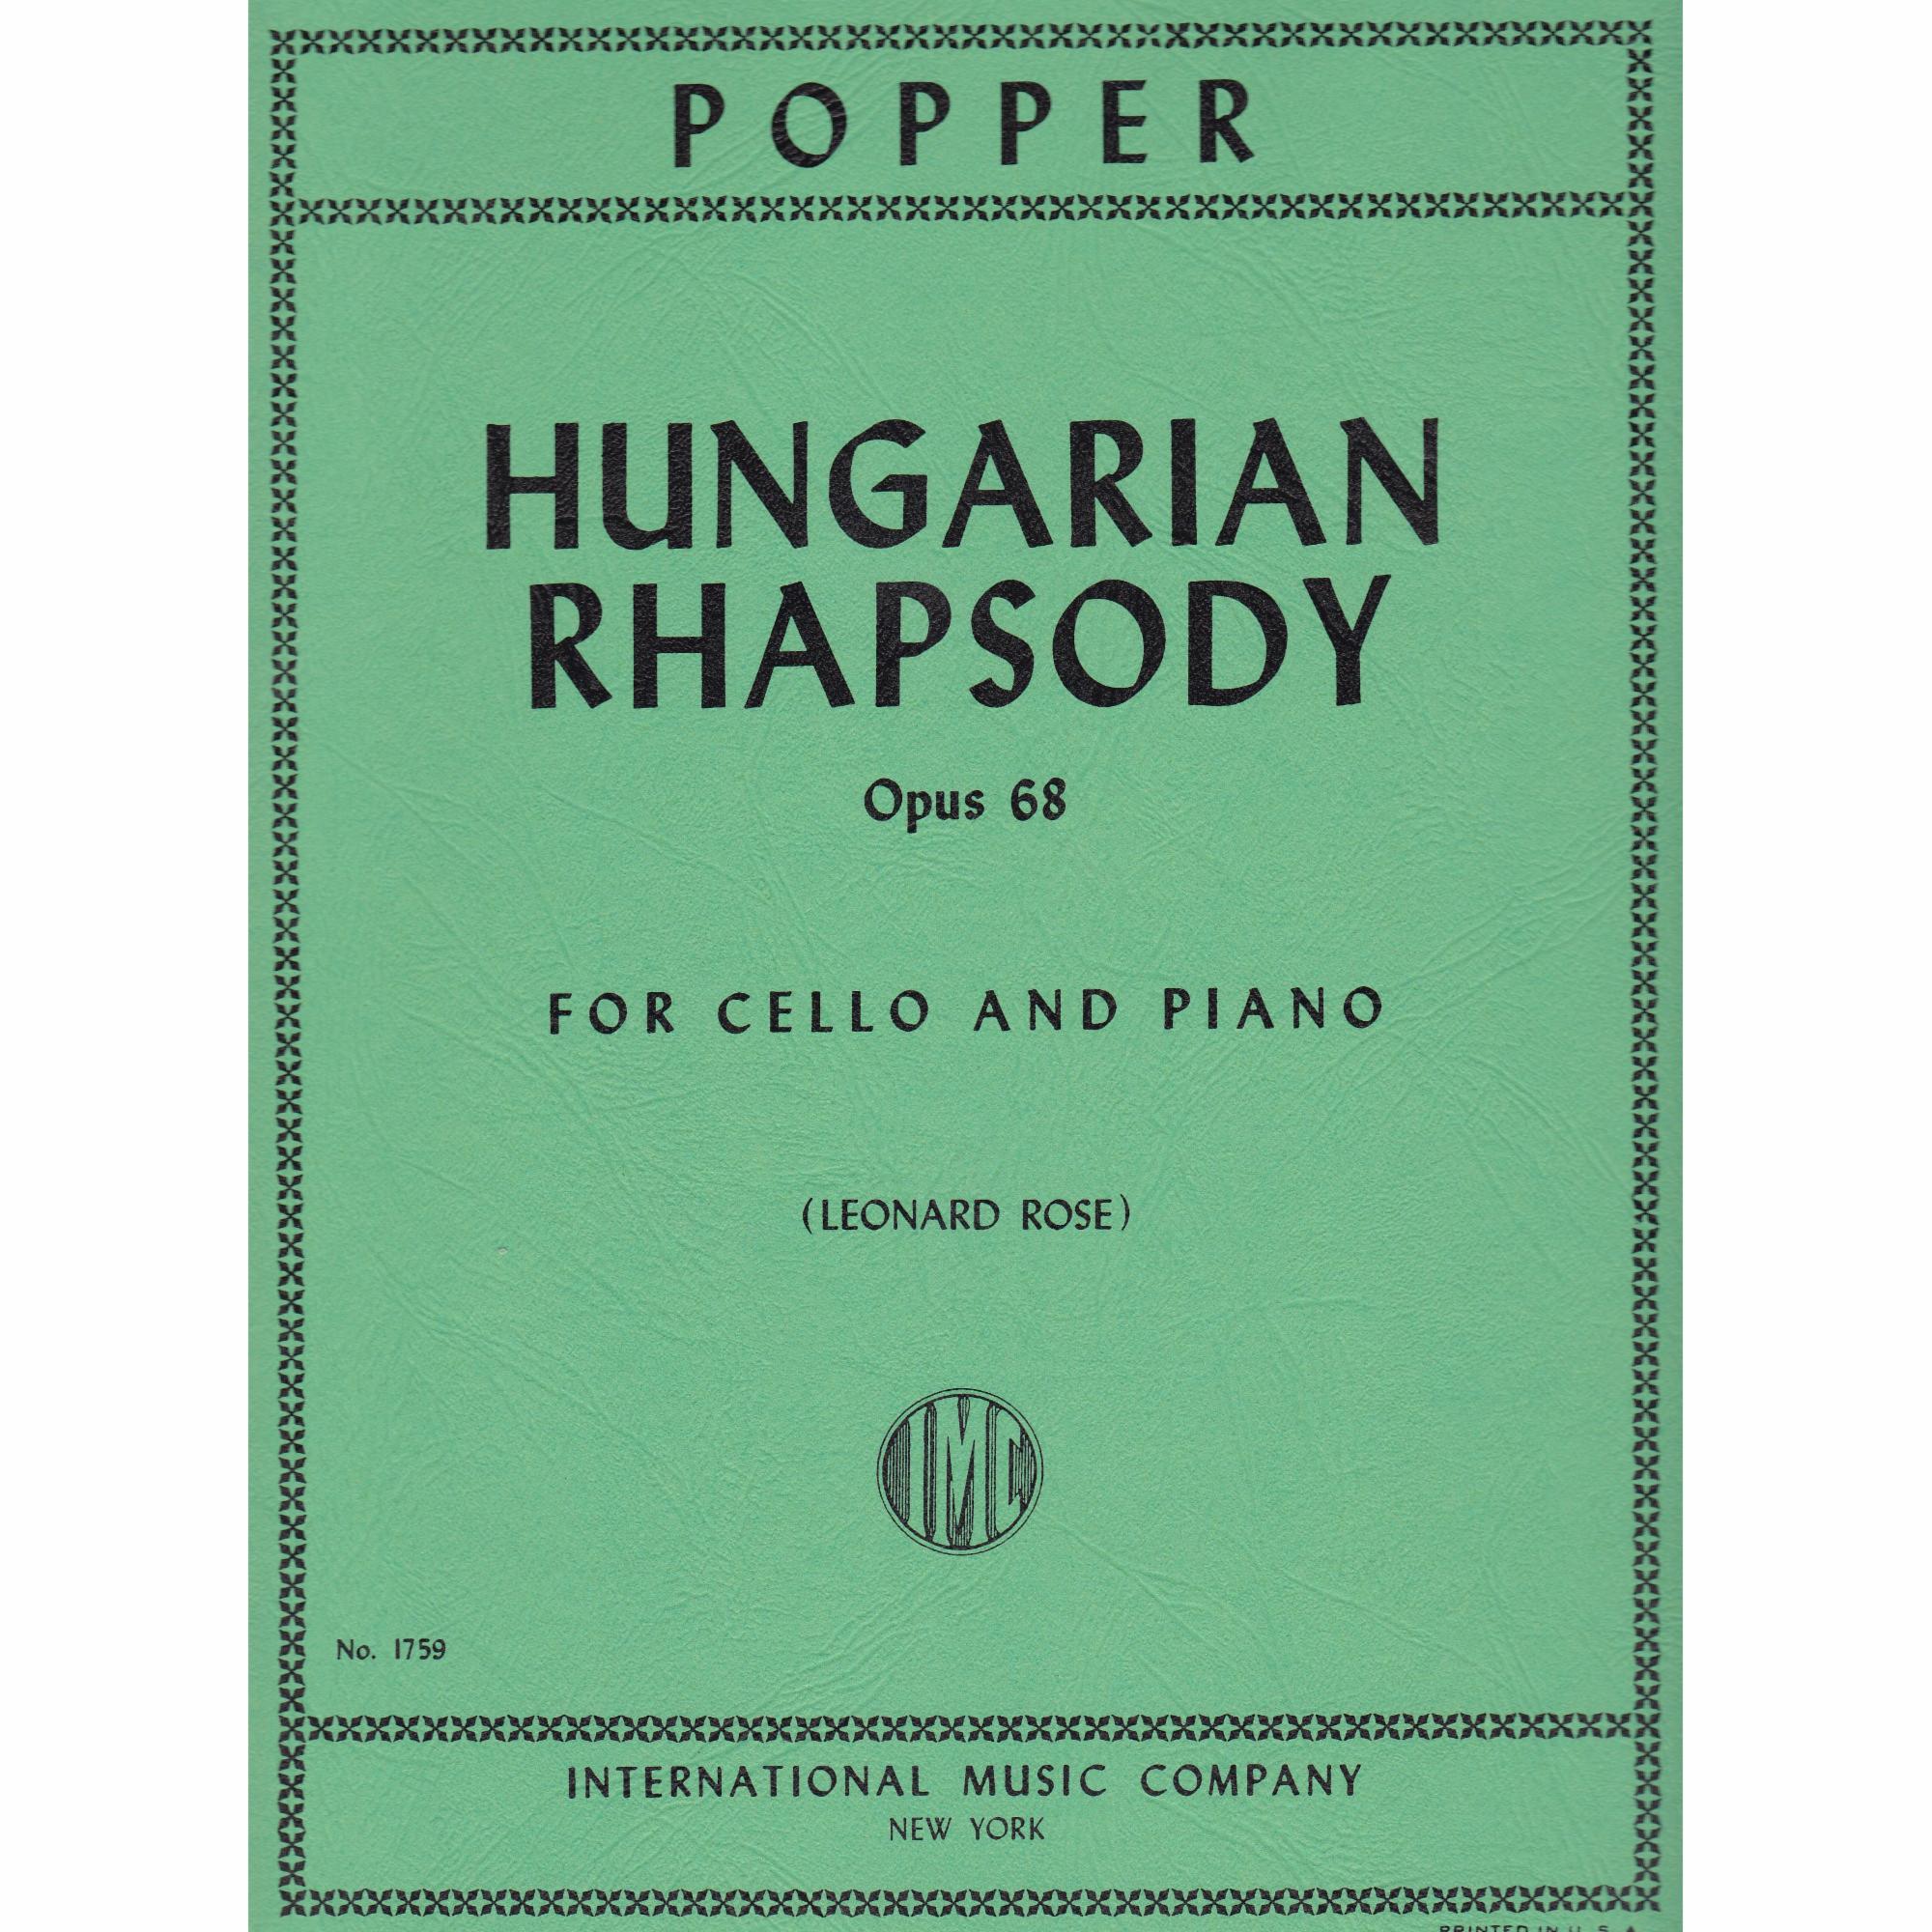 Hungarian Rhapsody for Cello and Piano, Op. 68